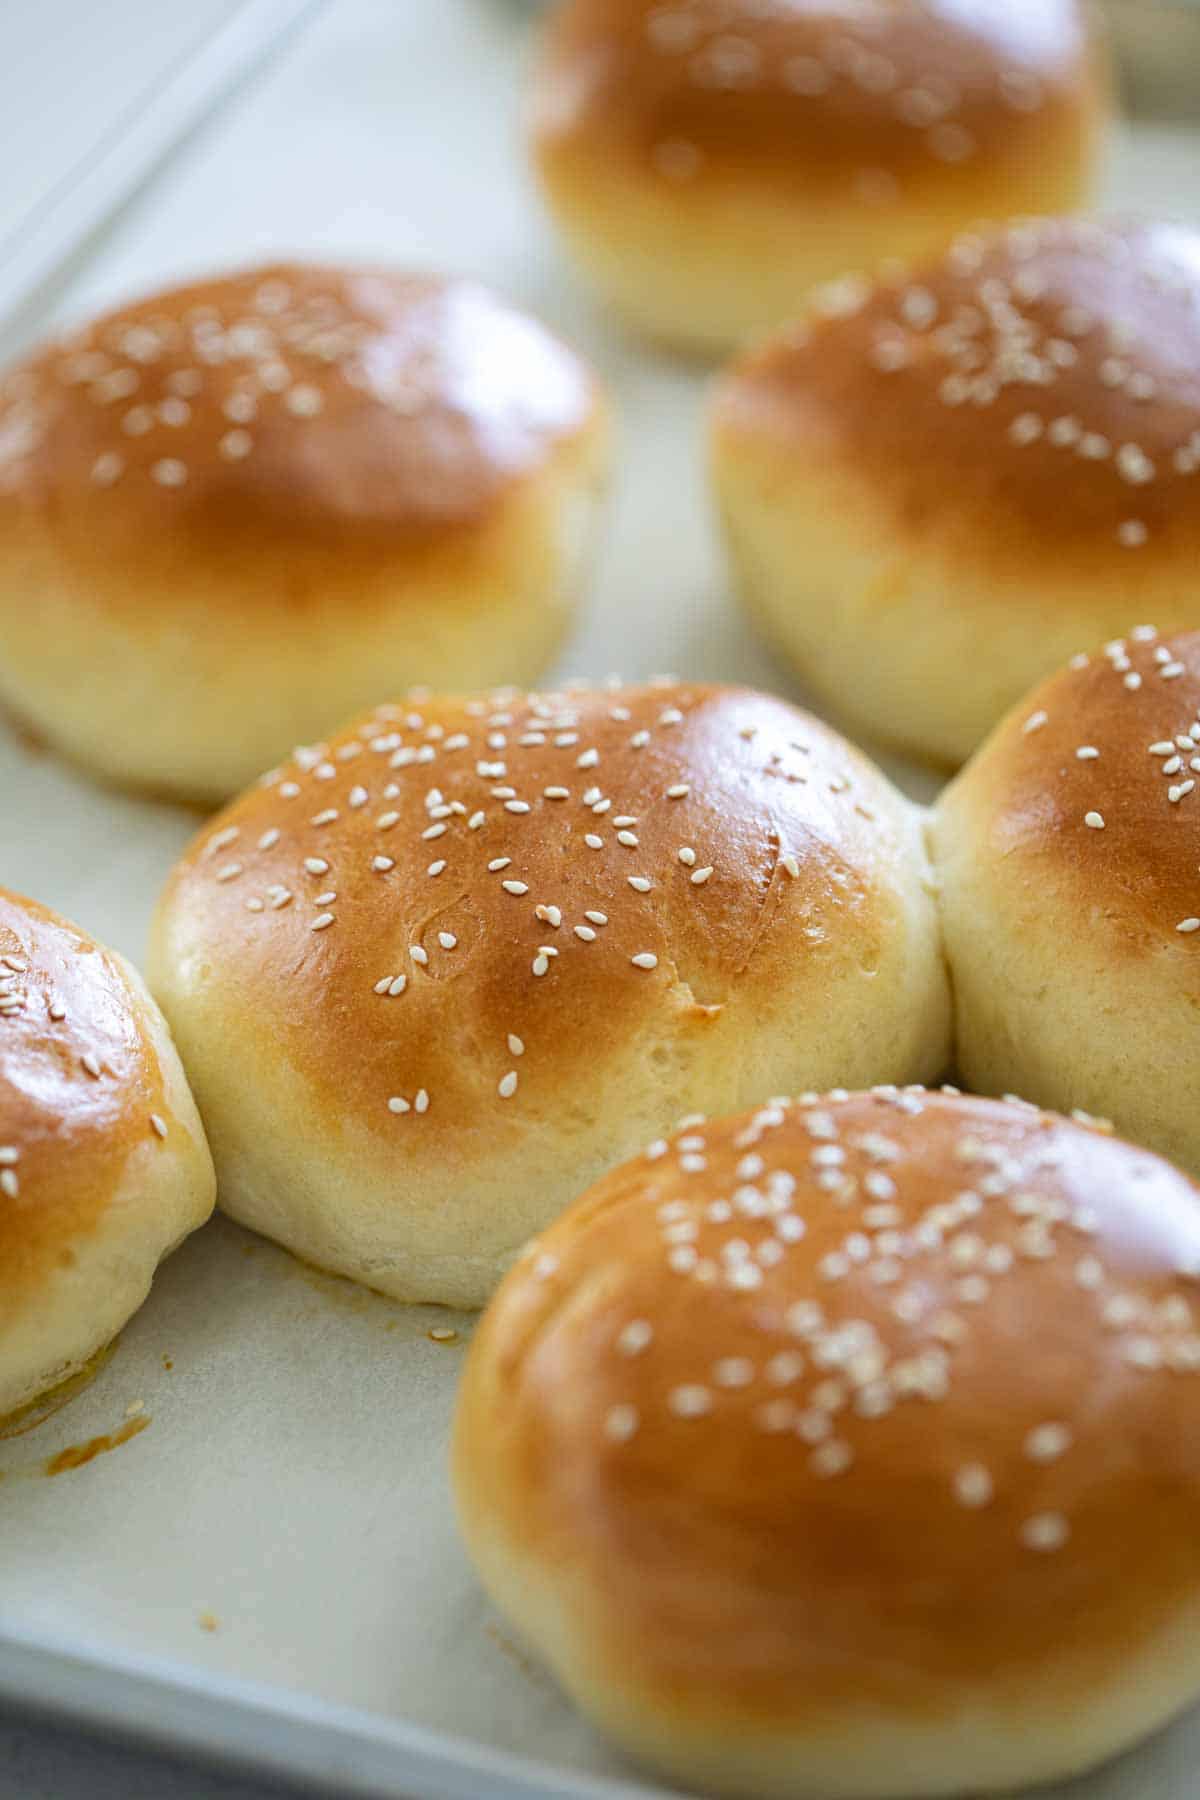 Homemade Hamburger Buns from Scratch - Taste and Tell